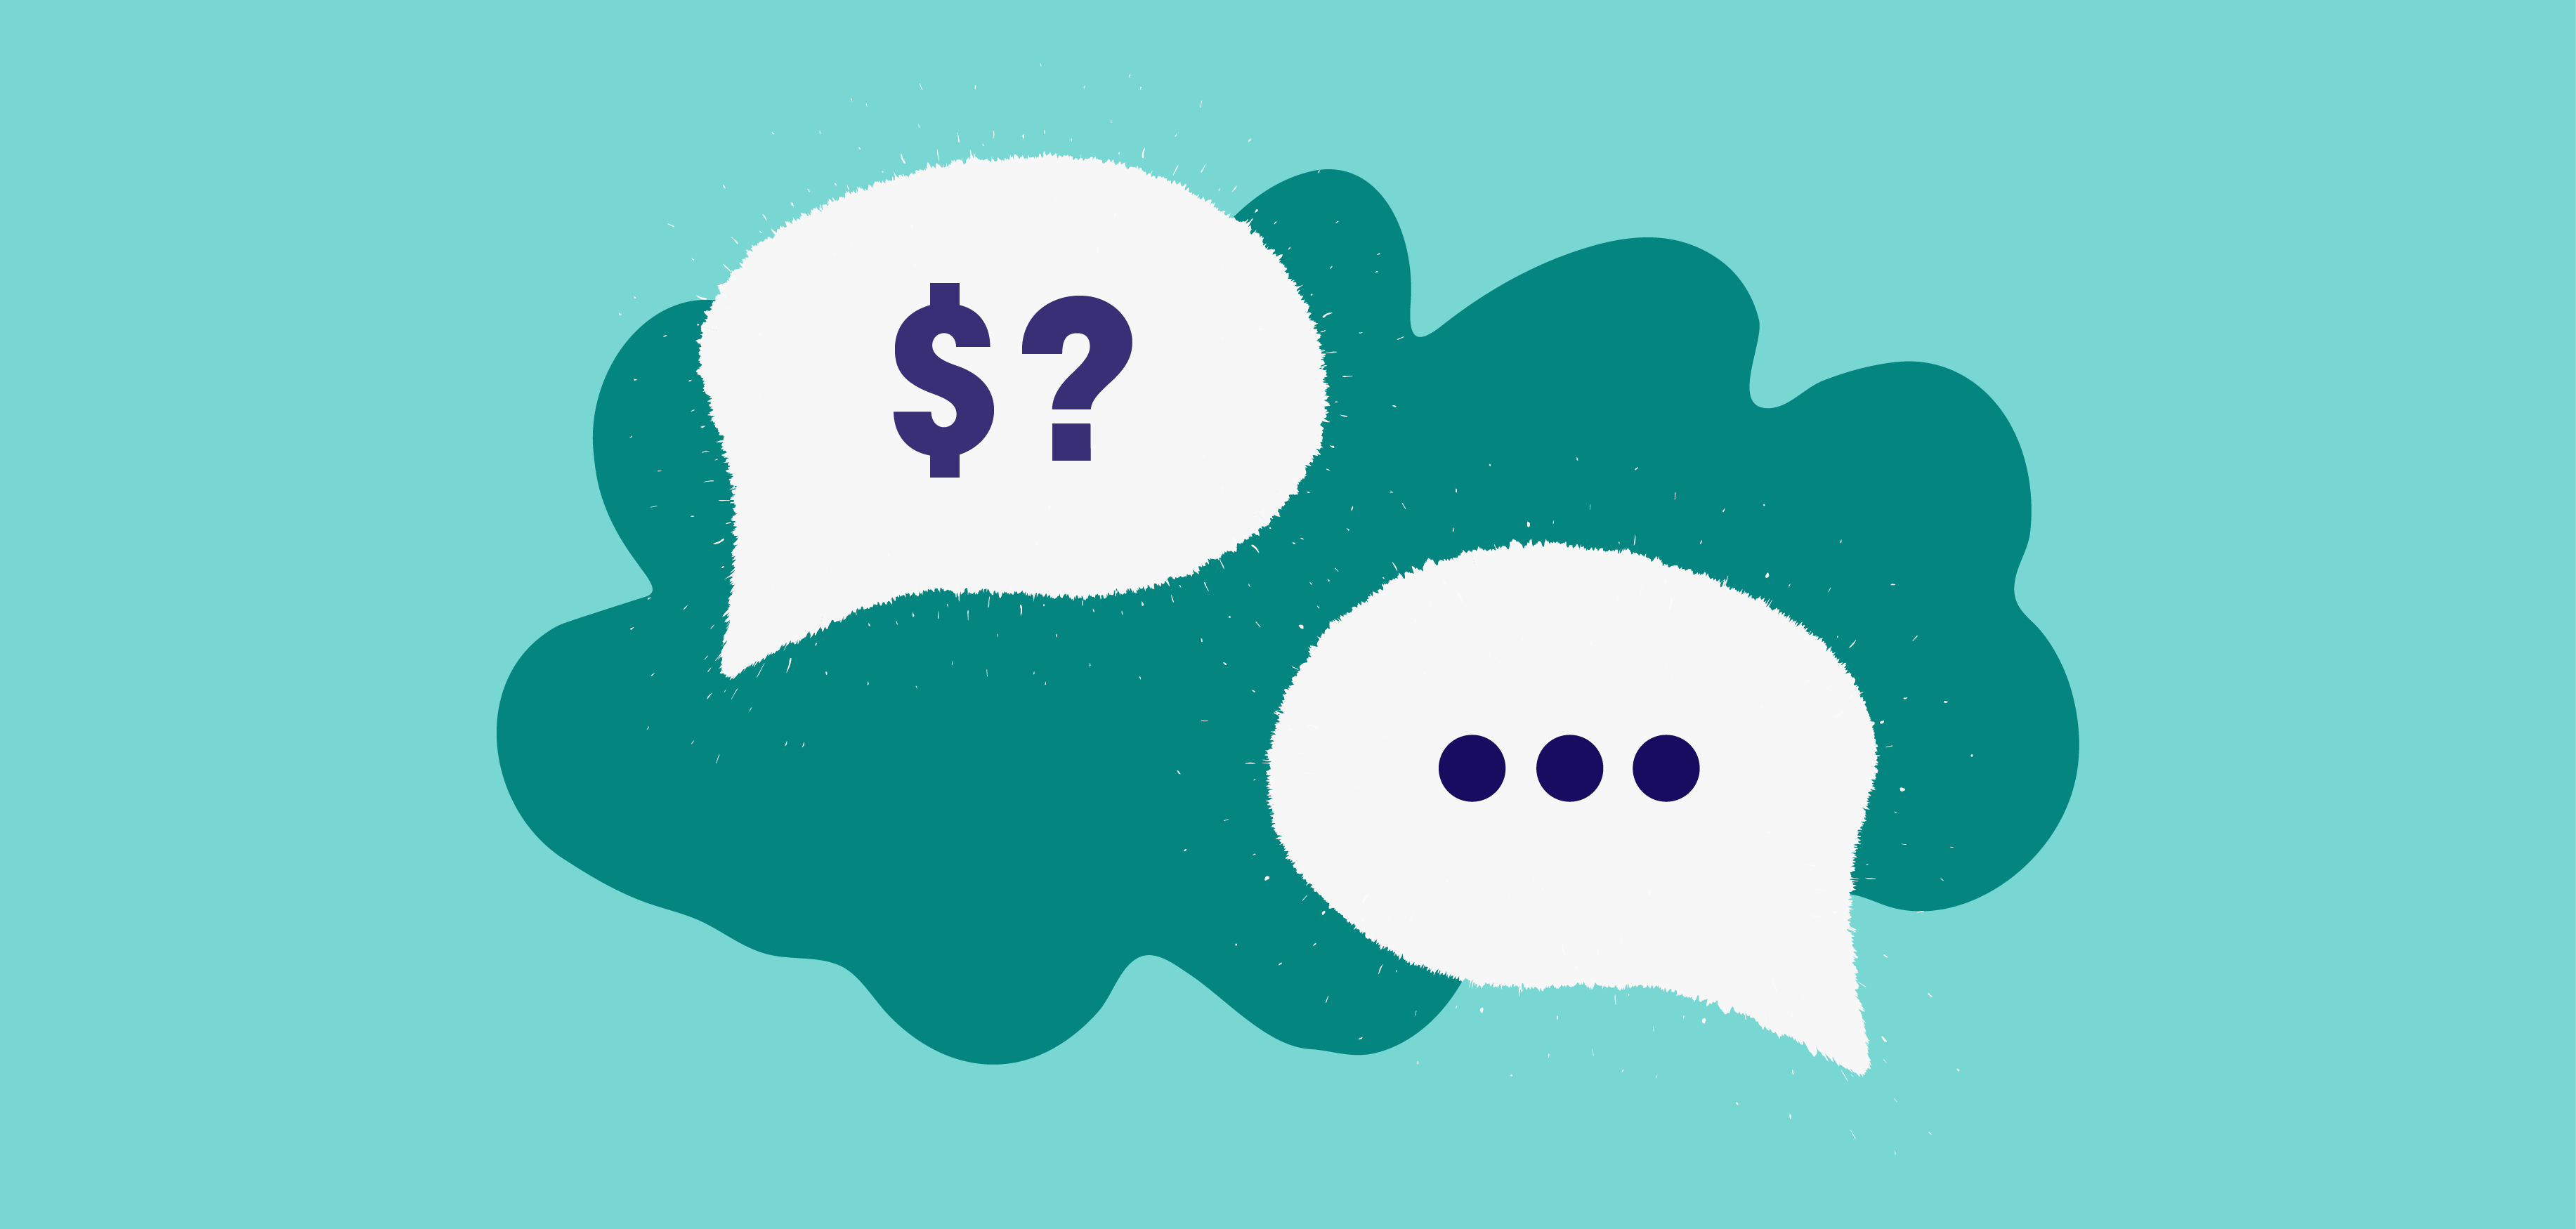 When Asked Salary Expectations, What Should You Say to Recruiters?